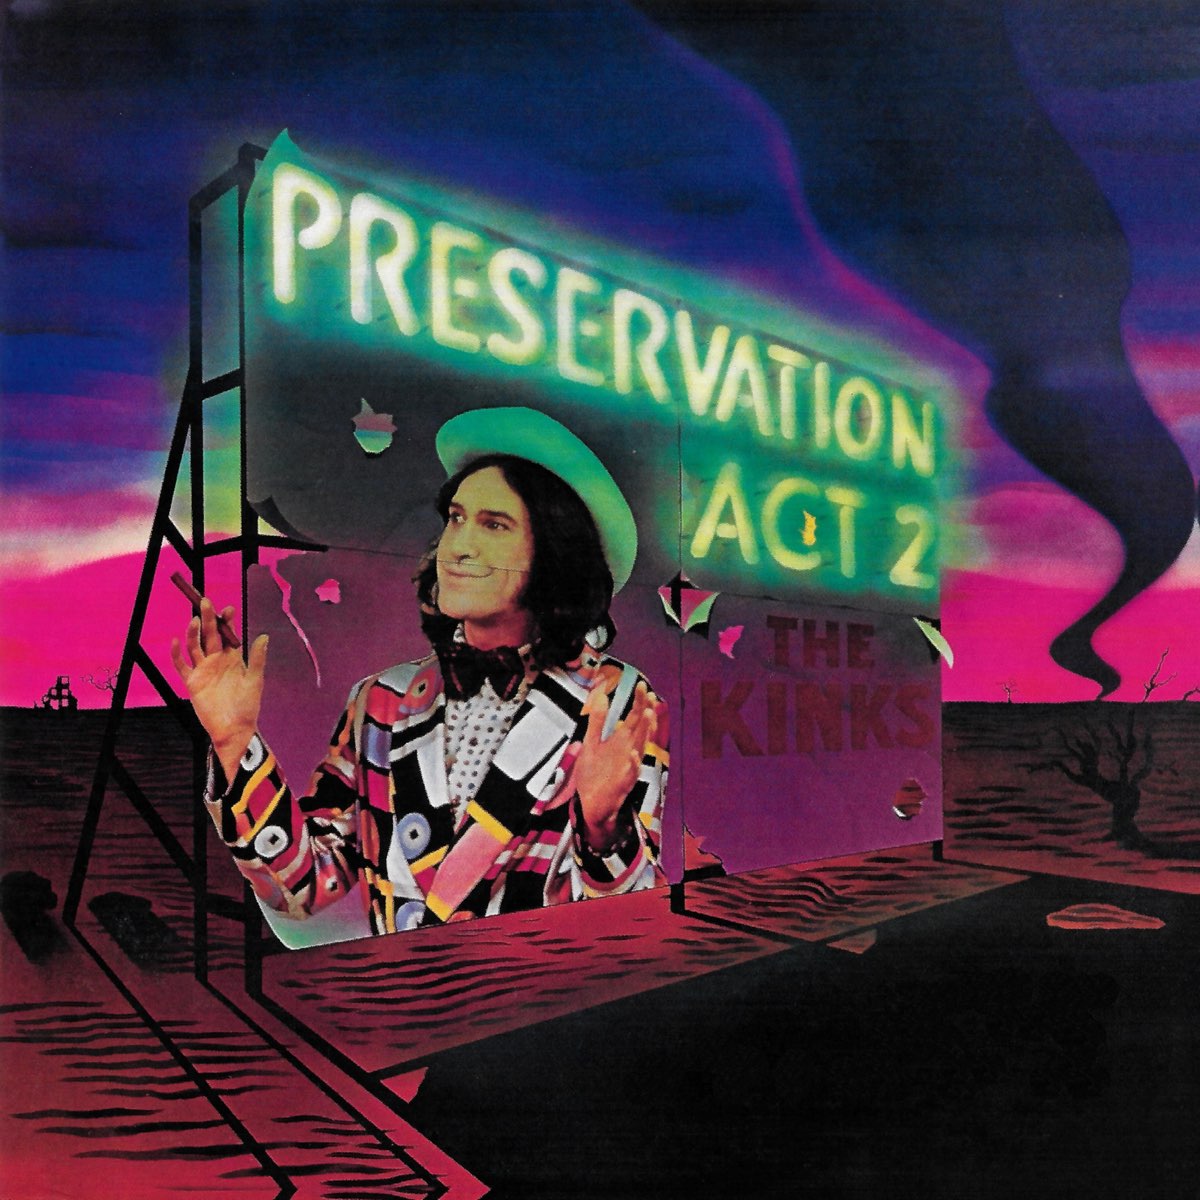 50 years ago today, @TheKinks released “Preservation Act 2.” Such a cruel lover. Read our cover-story Q&A with #RayDavies by #IraKaplan (#YoLaTengo, @TheRealYLT): magnetmagazine.com/2008/06/01/ray…